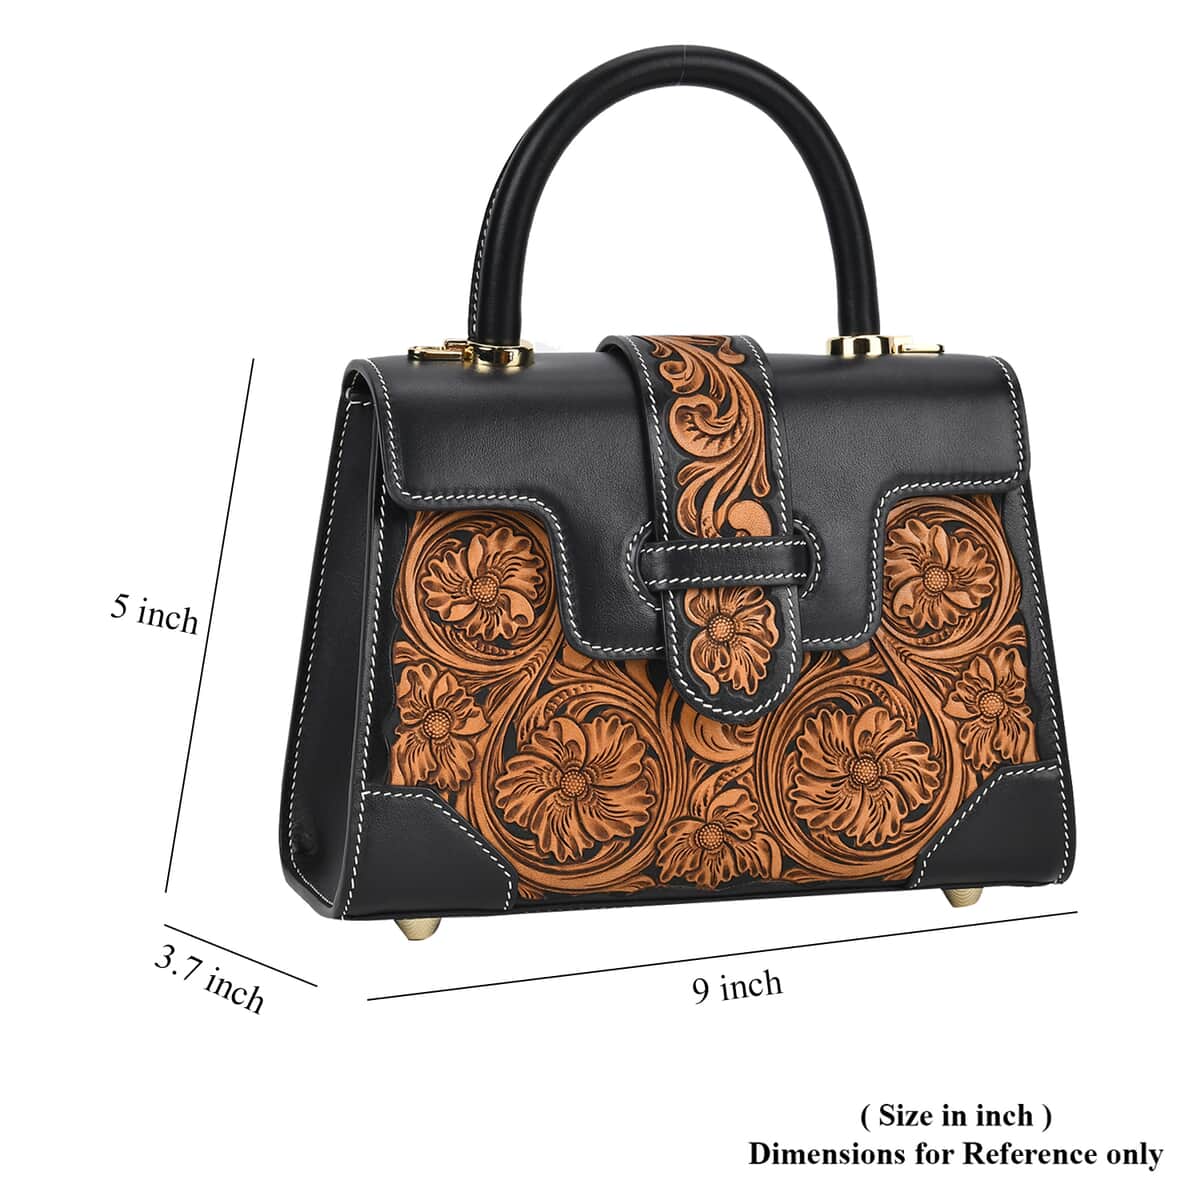 Grand Pelle Black with Solid Color Hand Engraving Flower Pattern Genuine Leather Crossbody Bag (9"x6.5"x3.7") with Handle Drop and Shoulder Strap image number 5